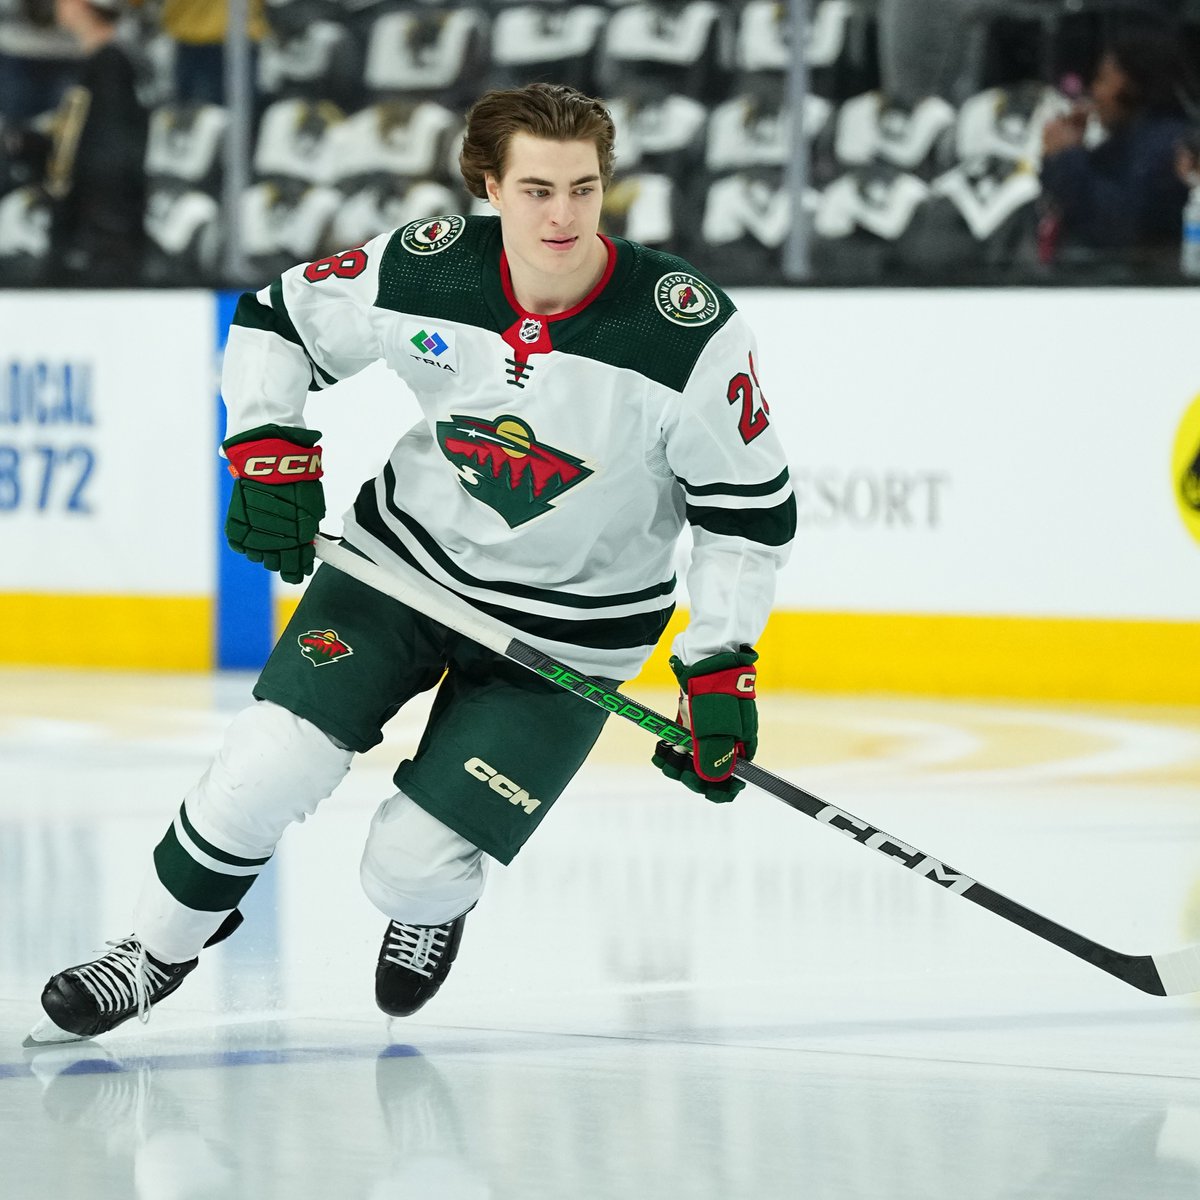 Start your week off right with some Ohgren content 🫡 learn more about the #mnwild prospect 👇 More ➡️ bit.ly/4dH5ZUH #mnwild